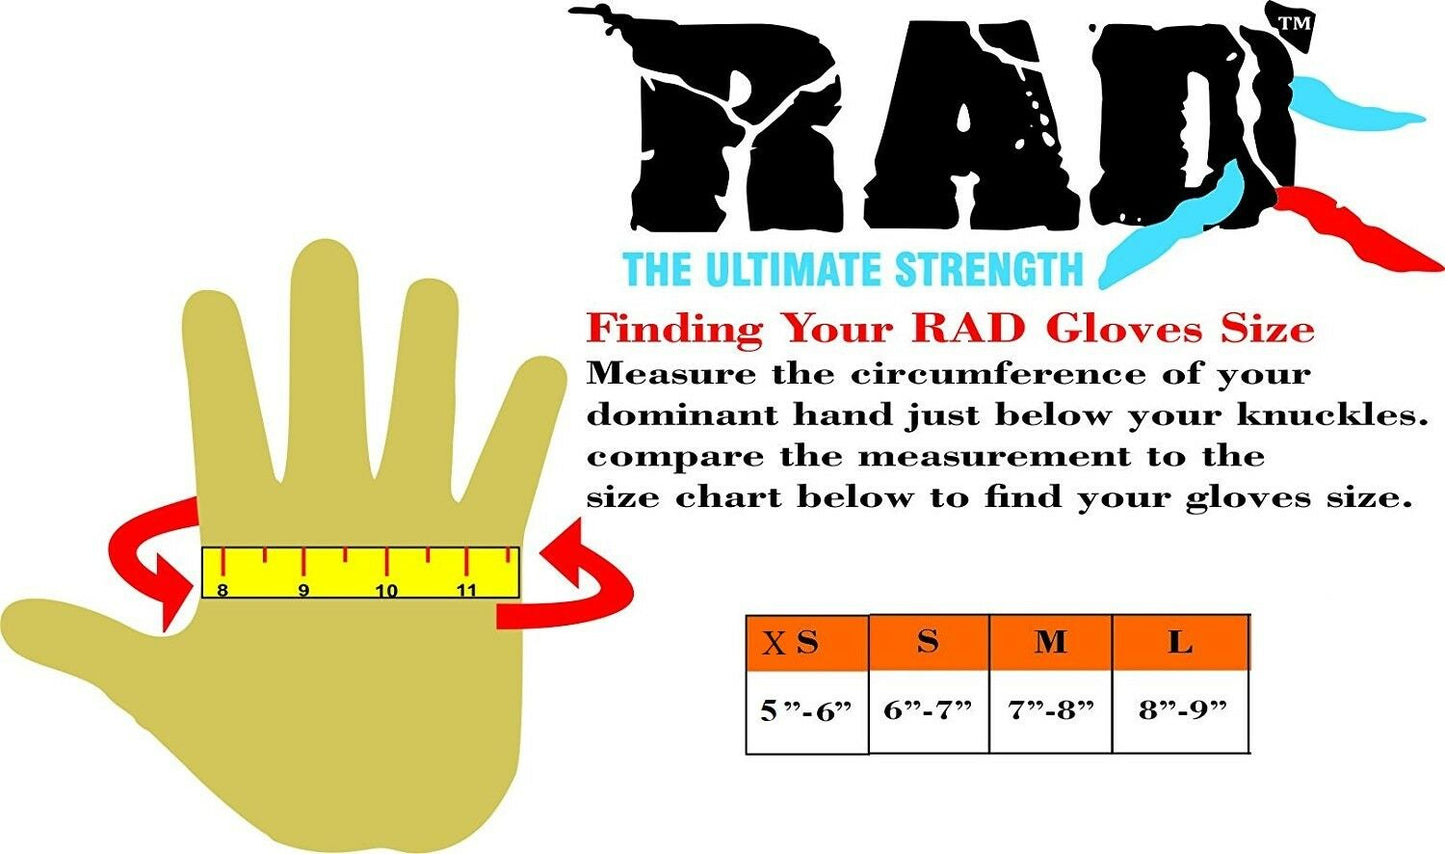 RAD Weight Lifting Gloves For  Women, Leather Gloves